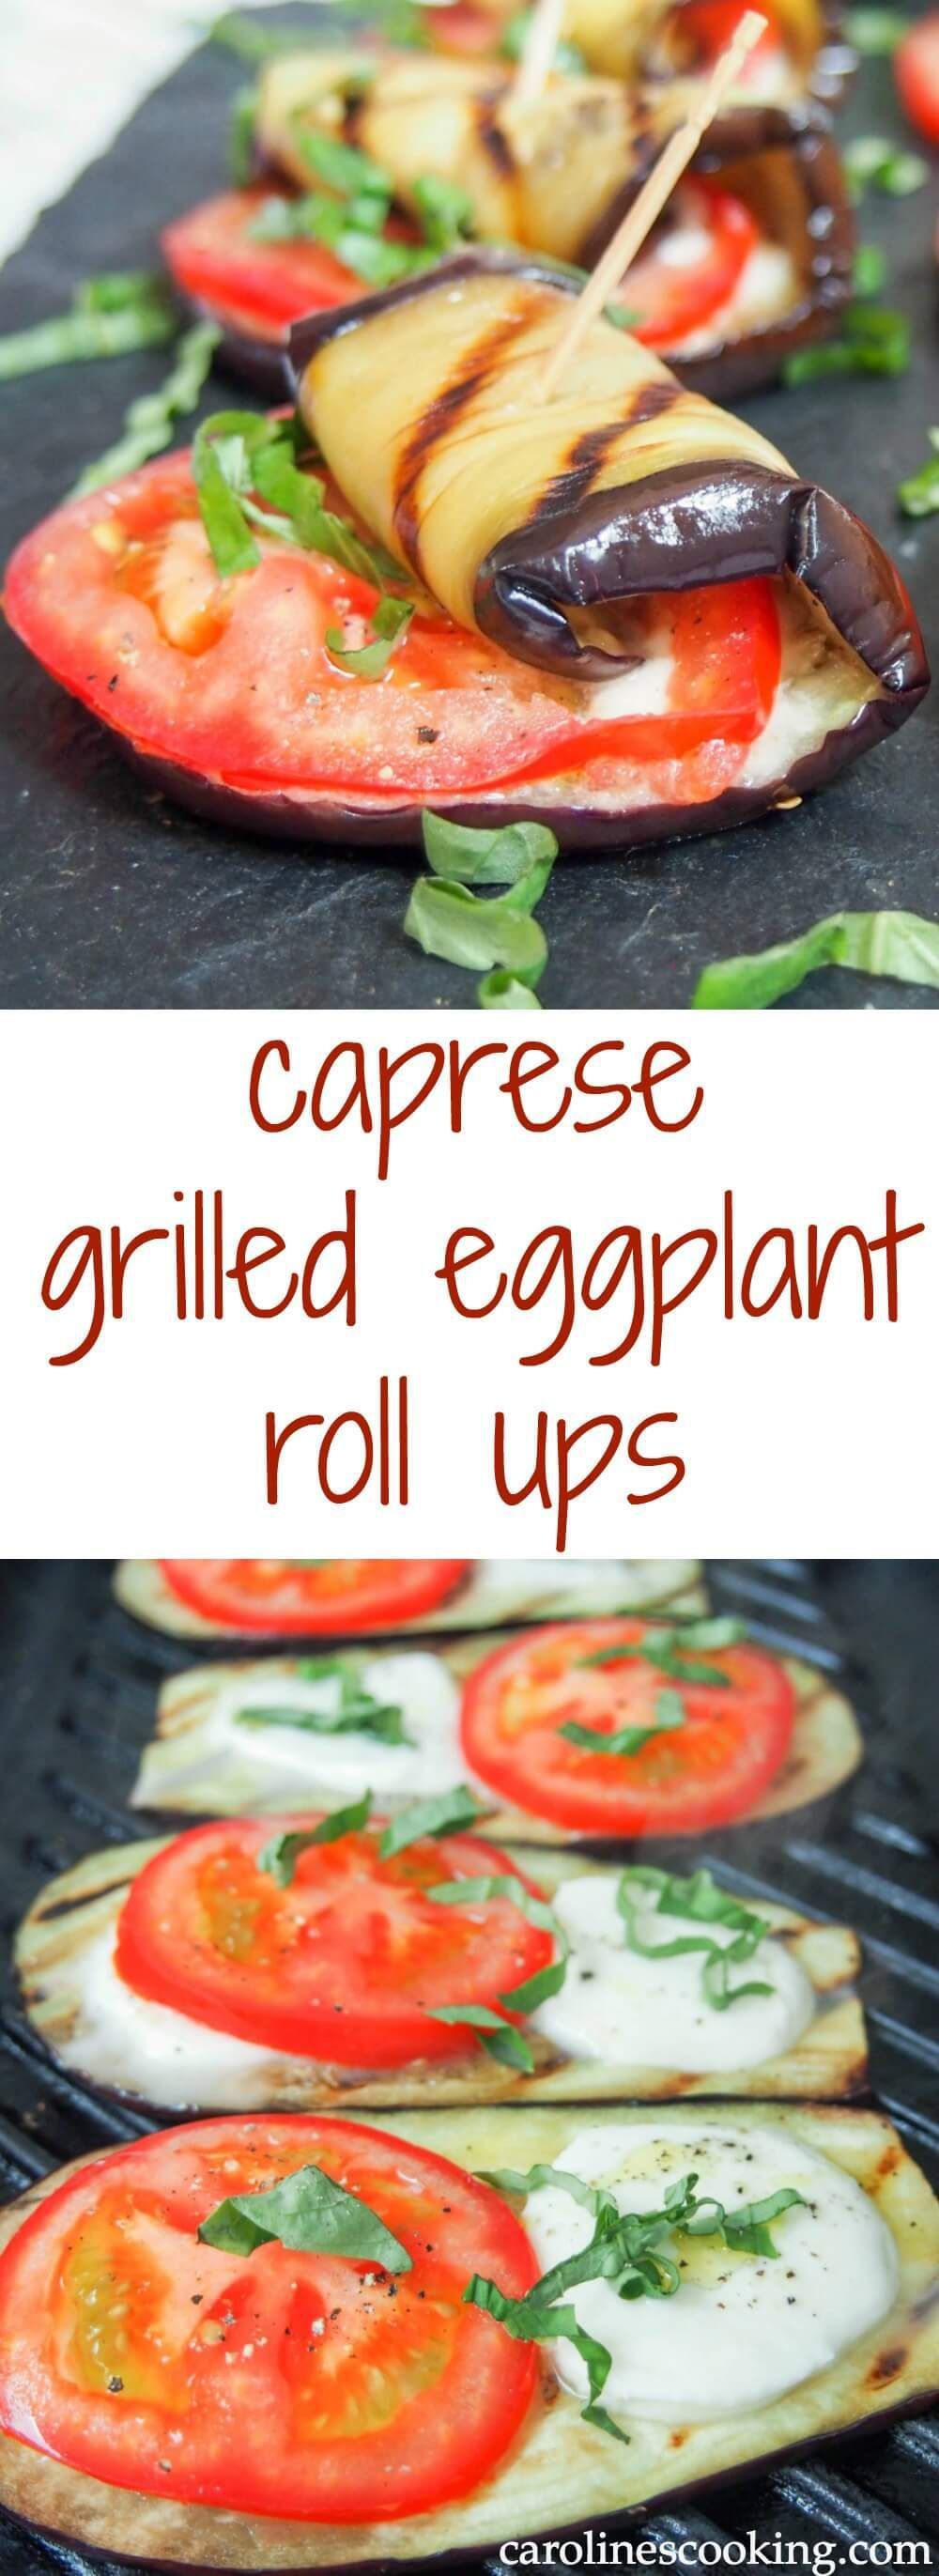 These caprese eggplant roll ups are easy to make and make a great appetizer or snack. Great fresh flavors fro the basil and